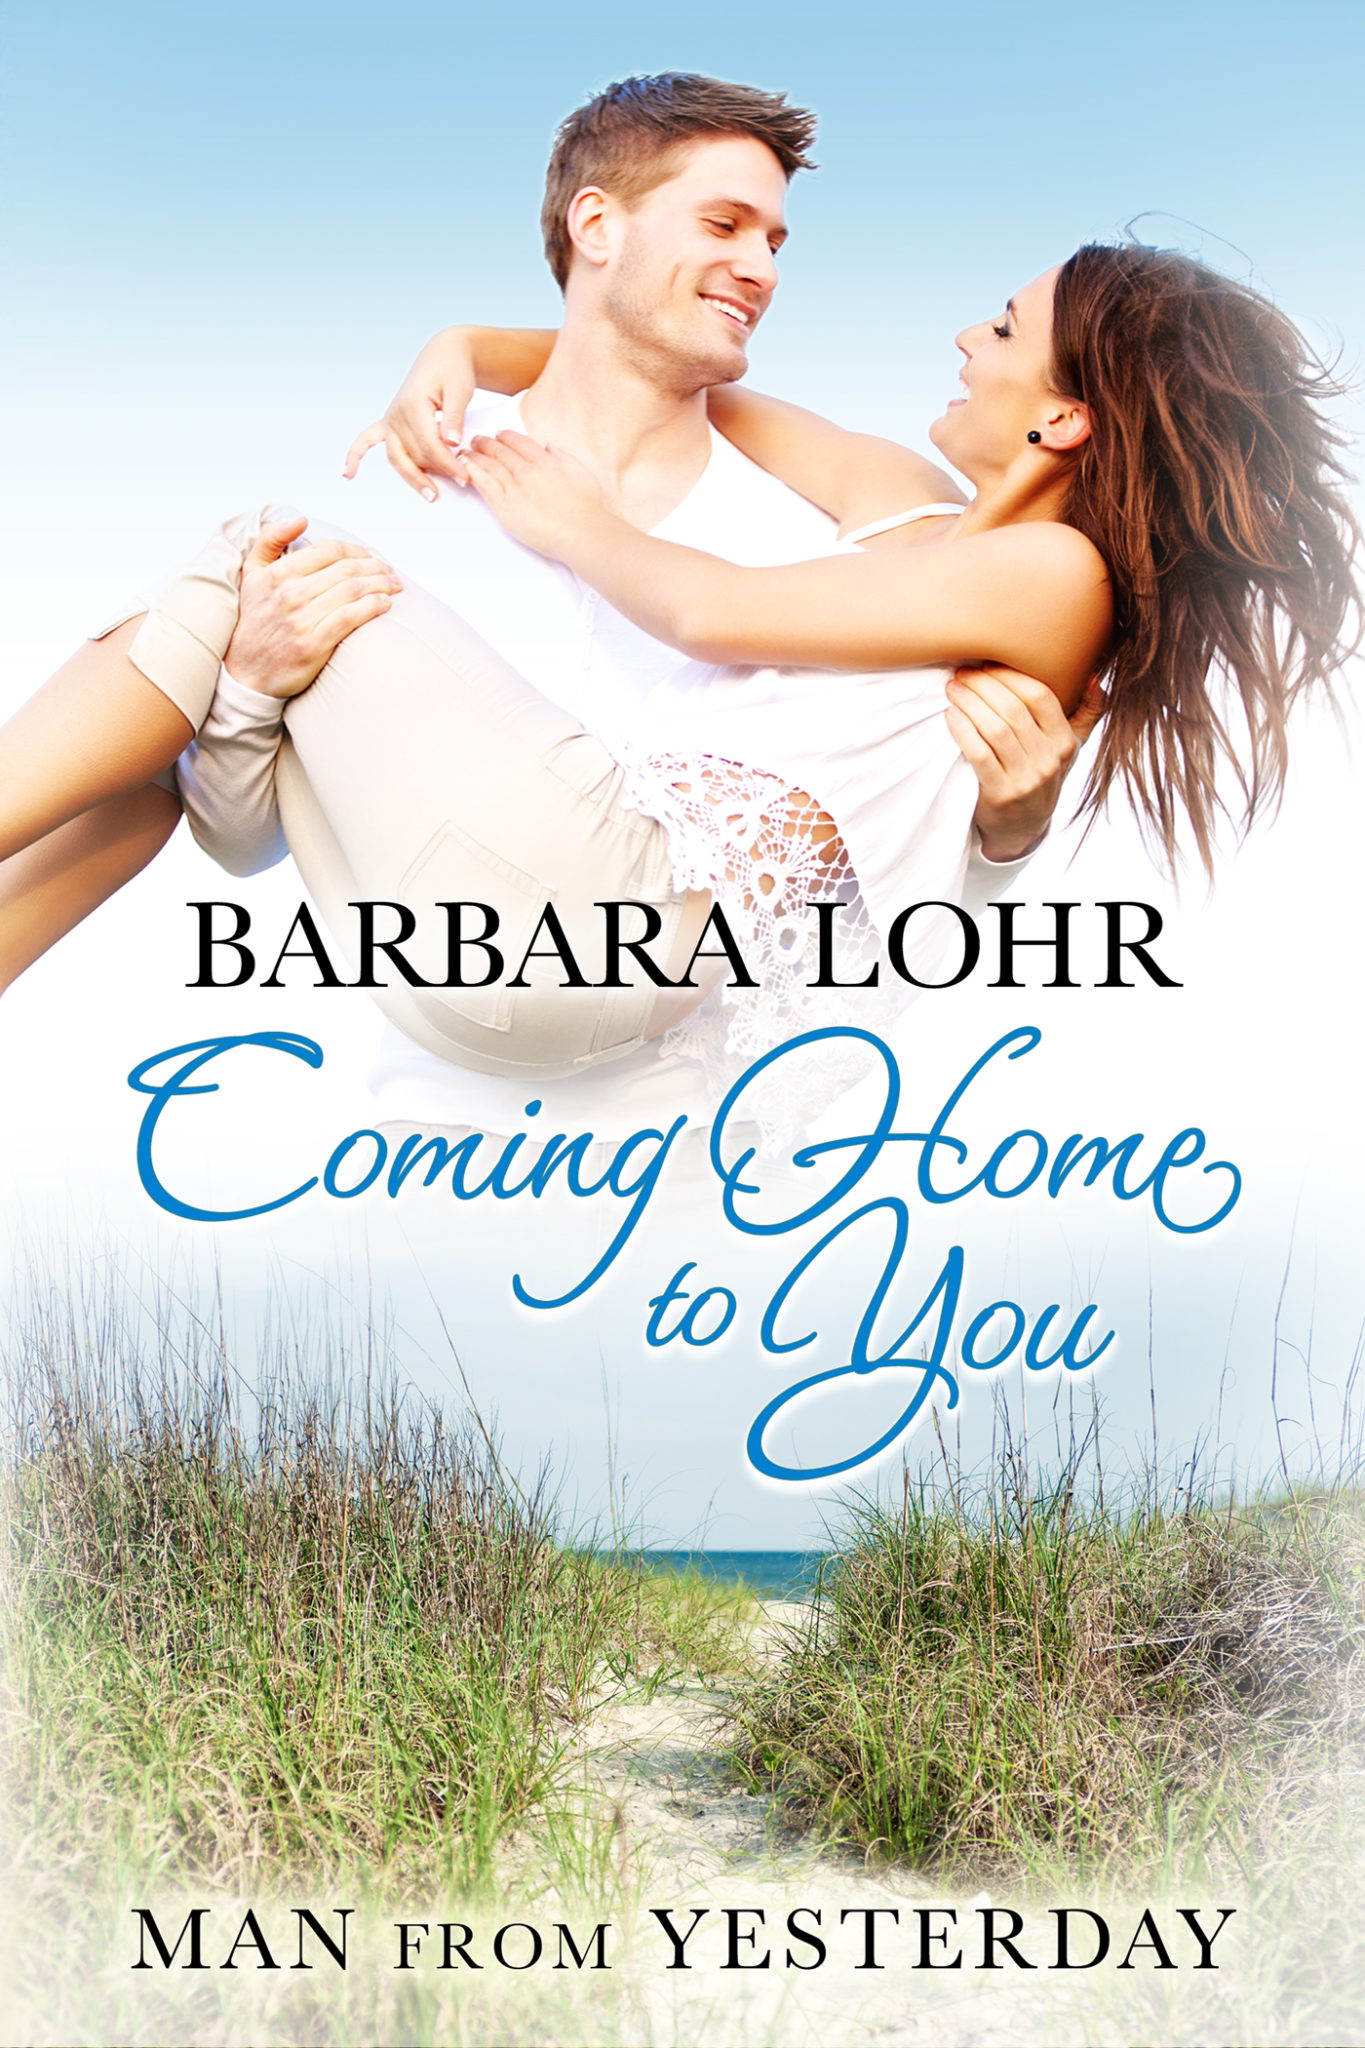 FREE: Coming Home to You by Barbara Lohr